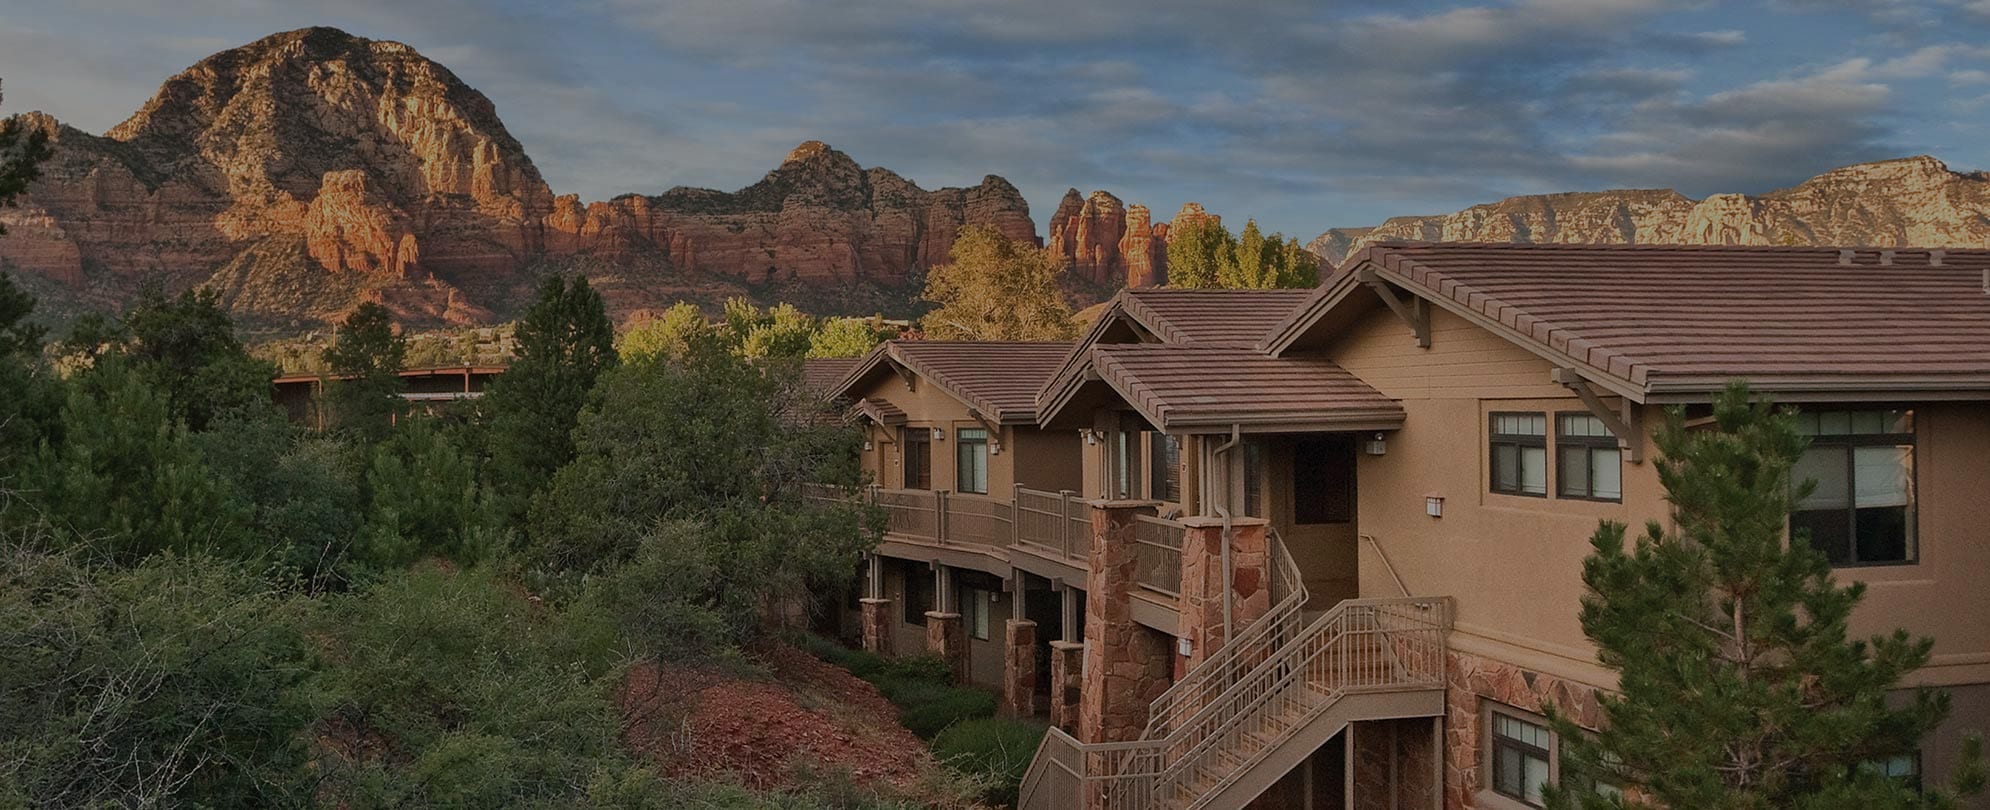 The exterior of Club Wyndham Sedona, a timeshare resort in Sedona, AZ, with red rock mountains in the distance